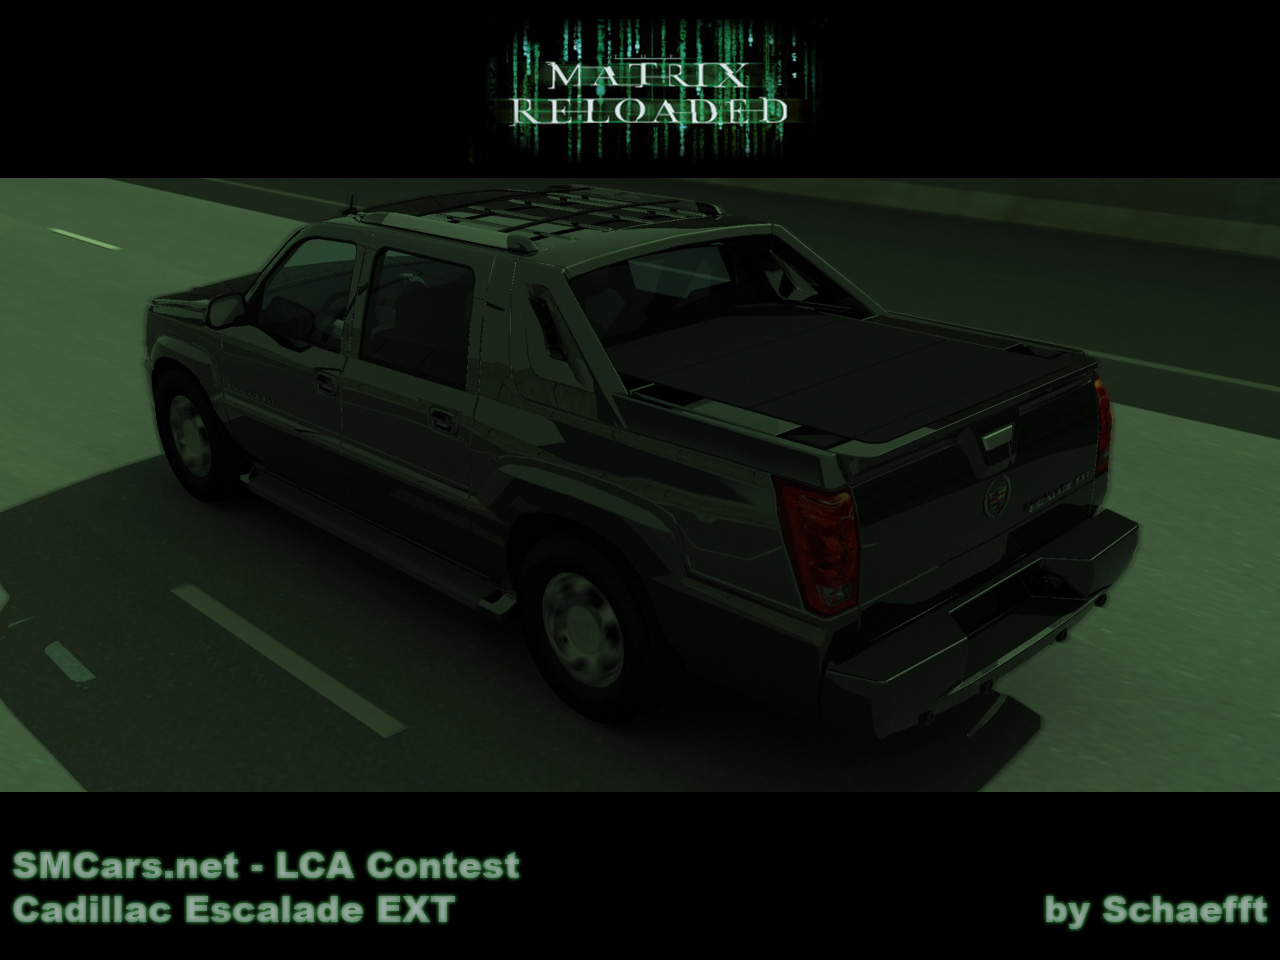 SMCars.net-LCA Contest entry:2